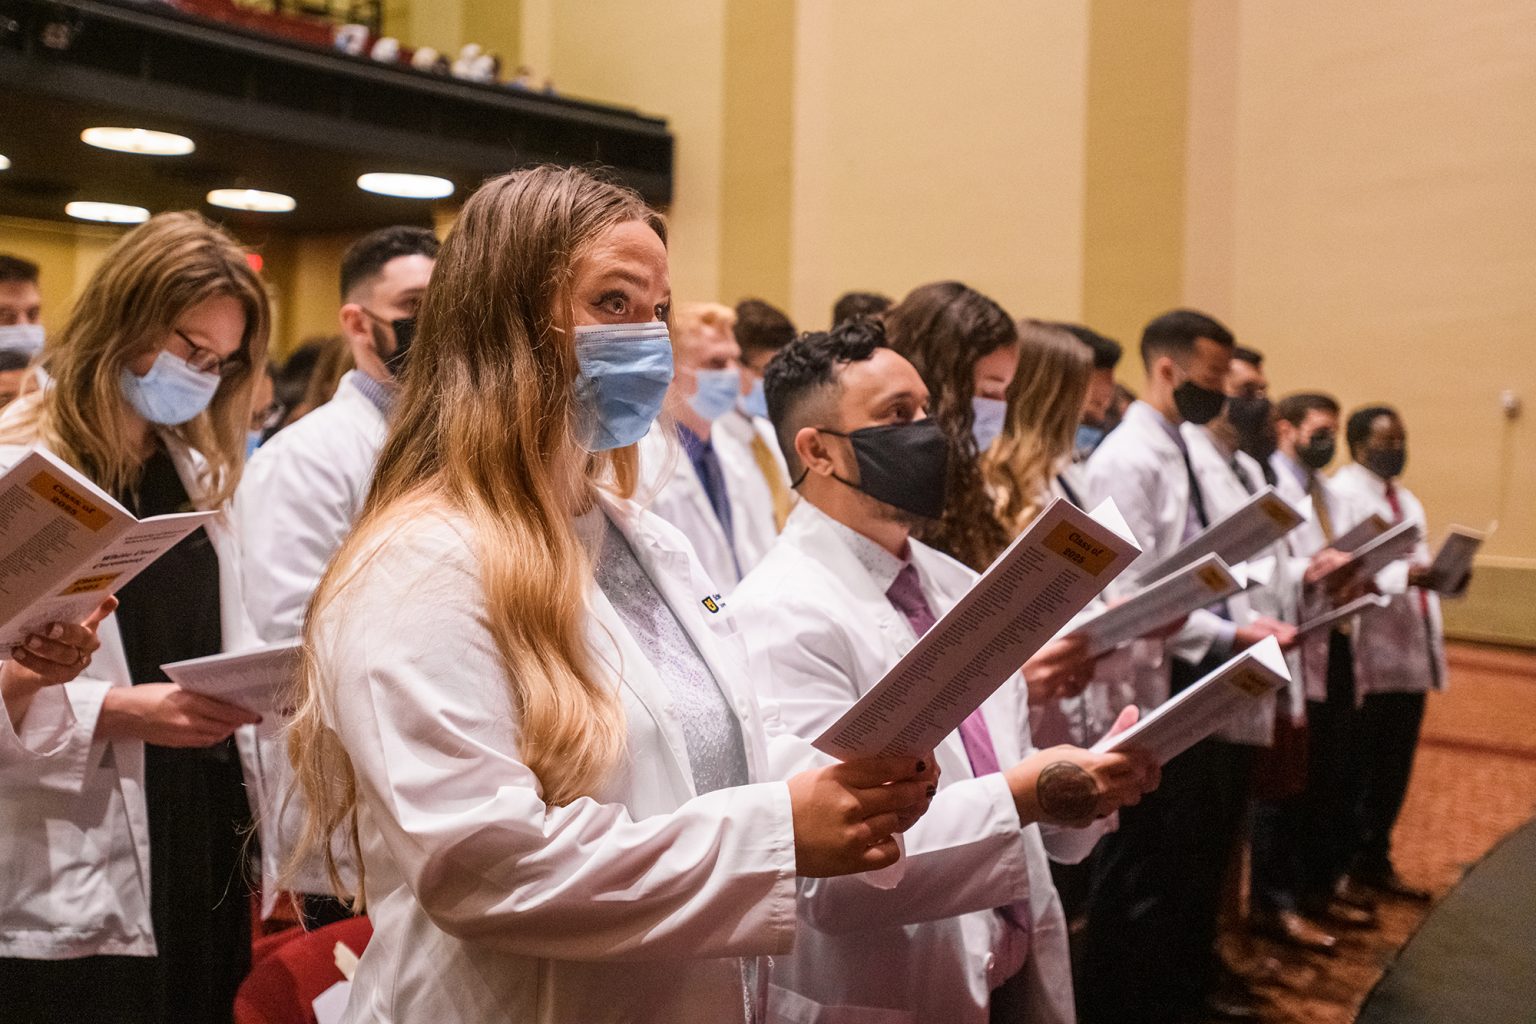 Class of 2025 students launch medical careers at White Coat Ceremony